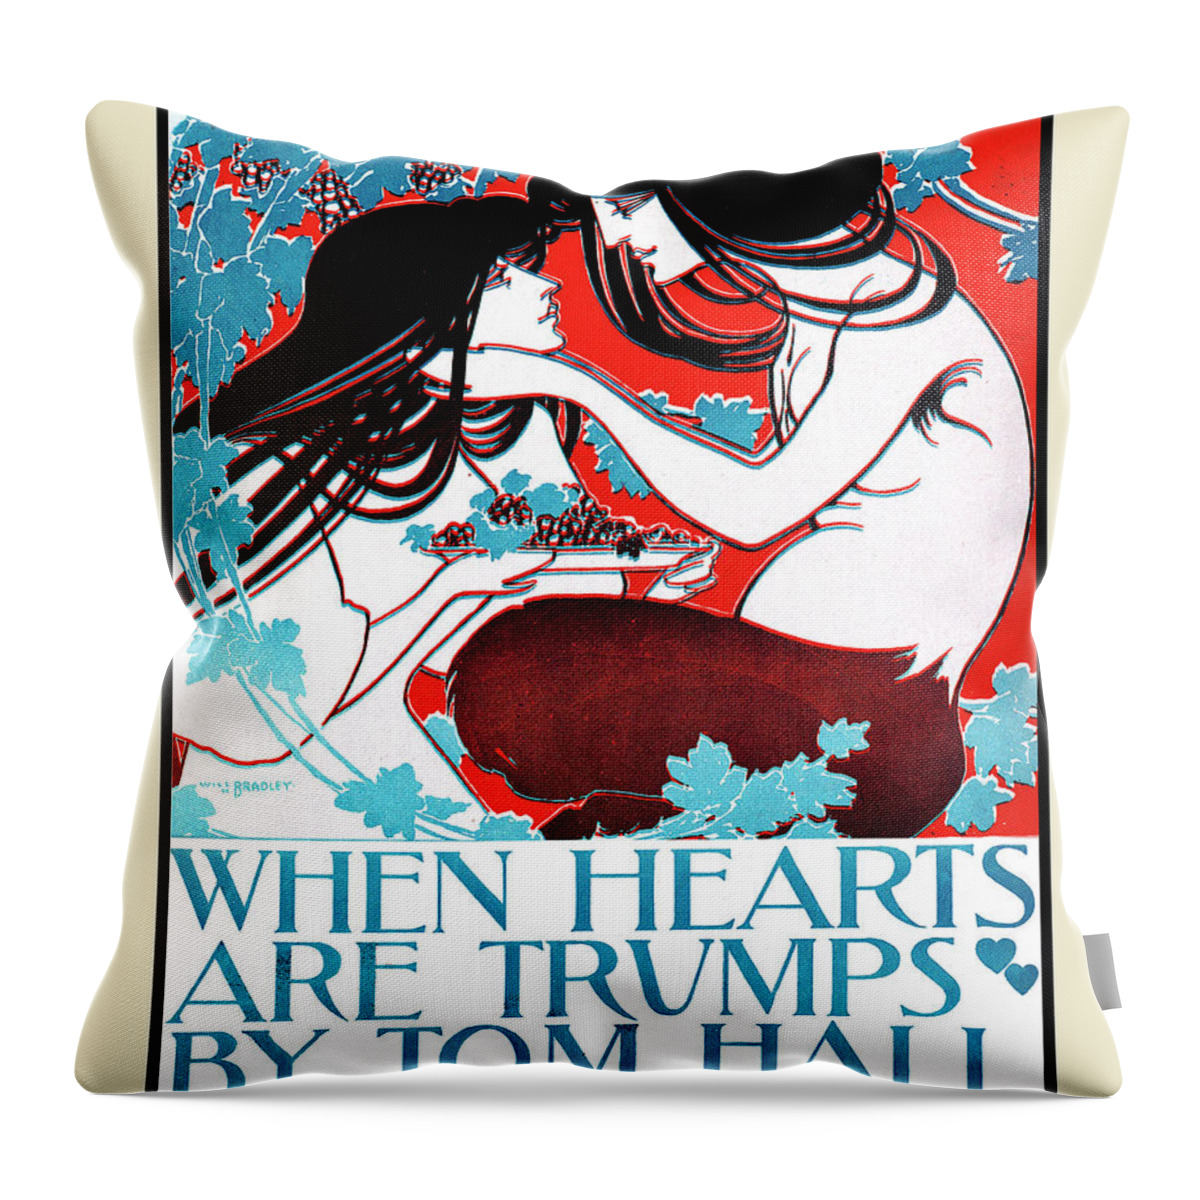 Poster Throw Pillow featuring the painting When hearts are trumps by Tom Hall by Bradley, Will